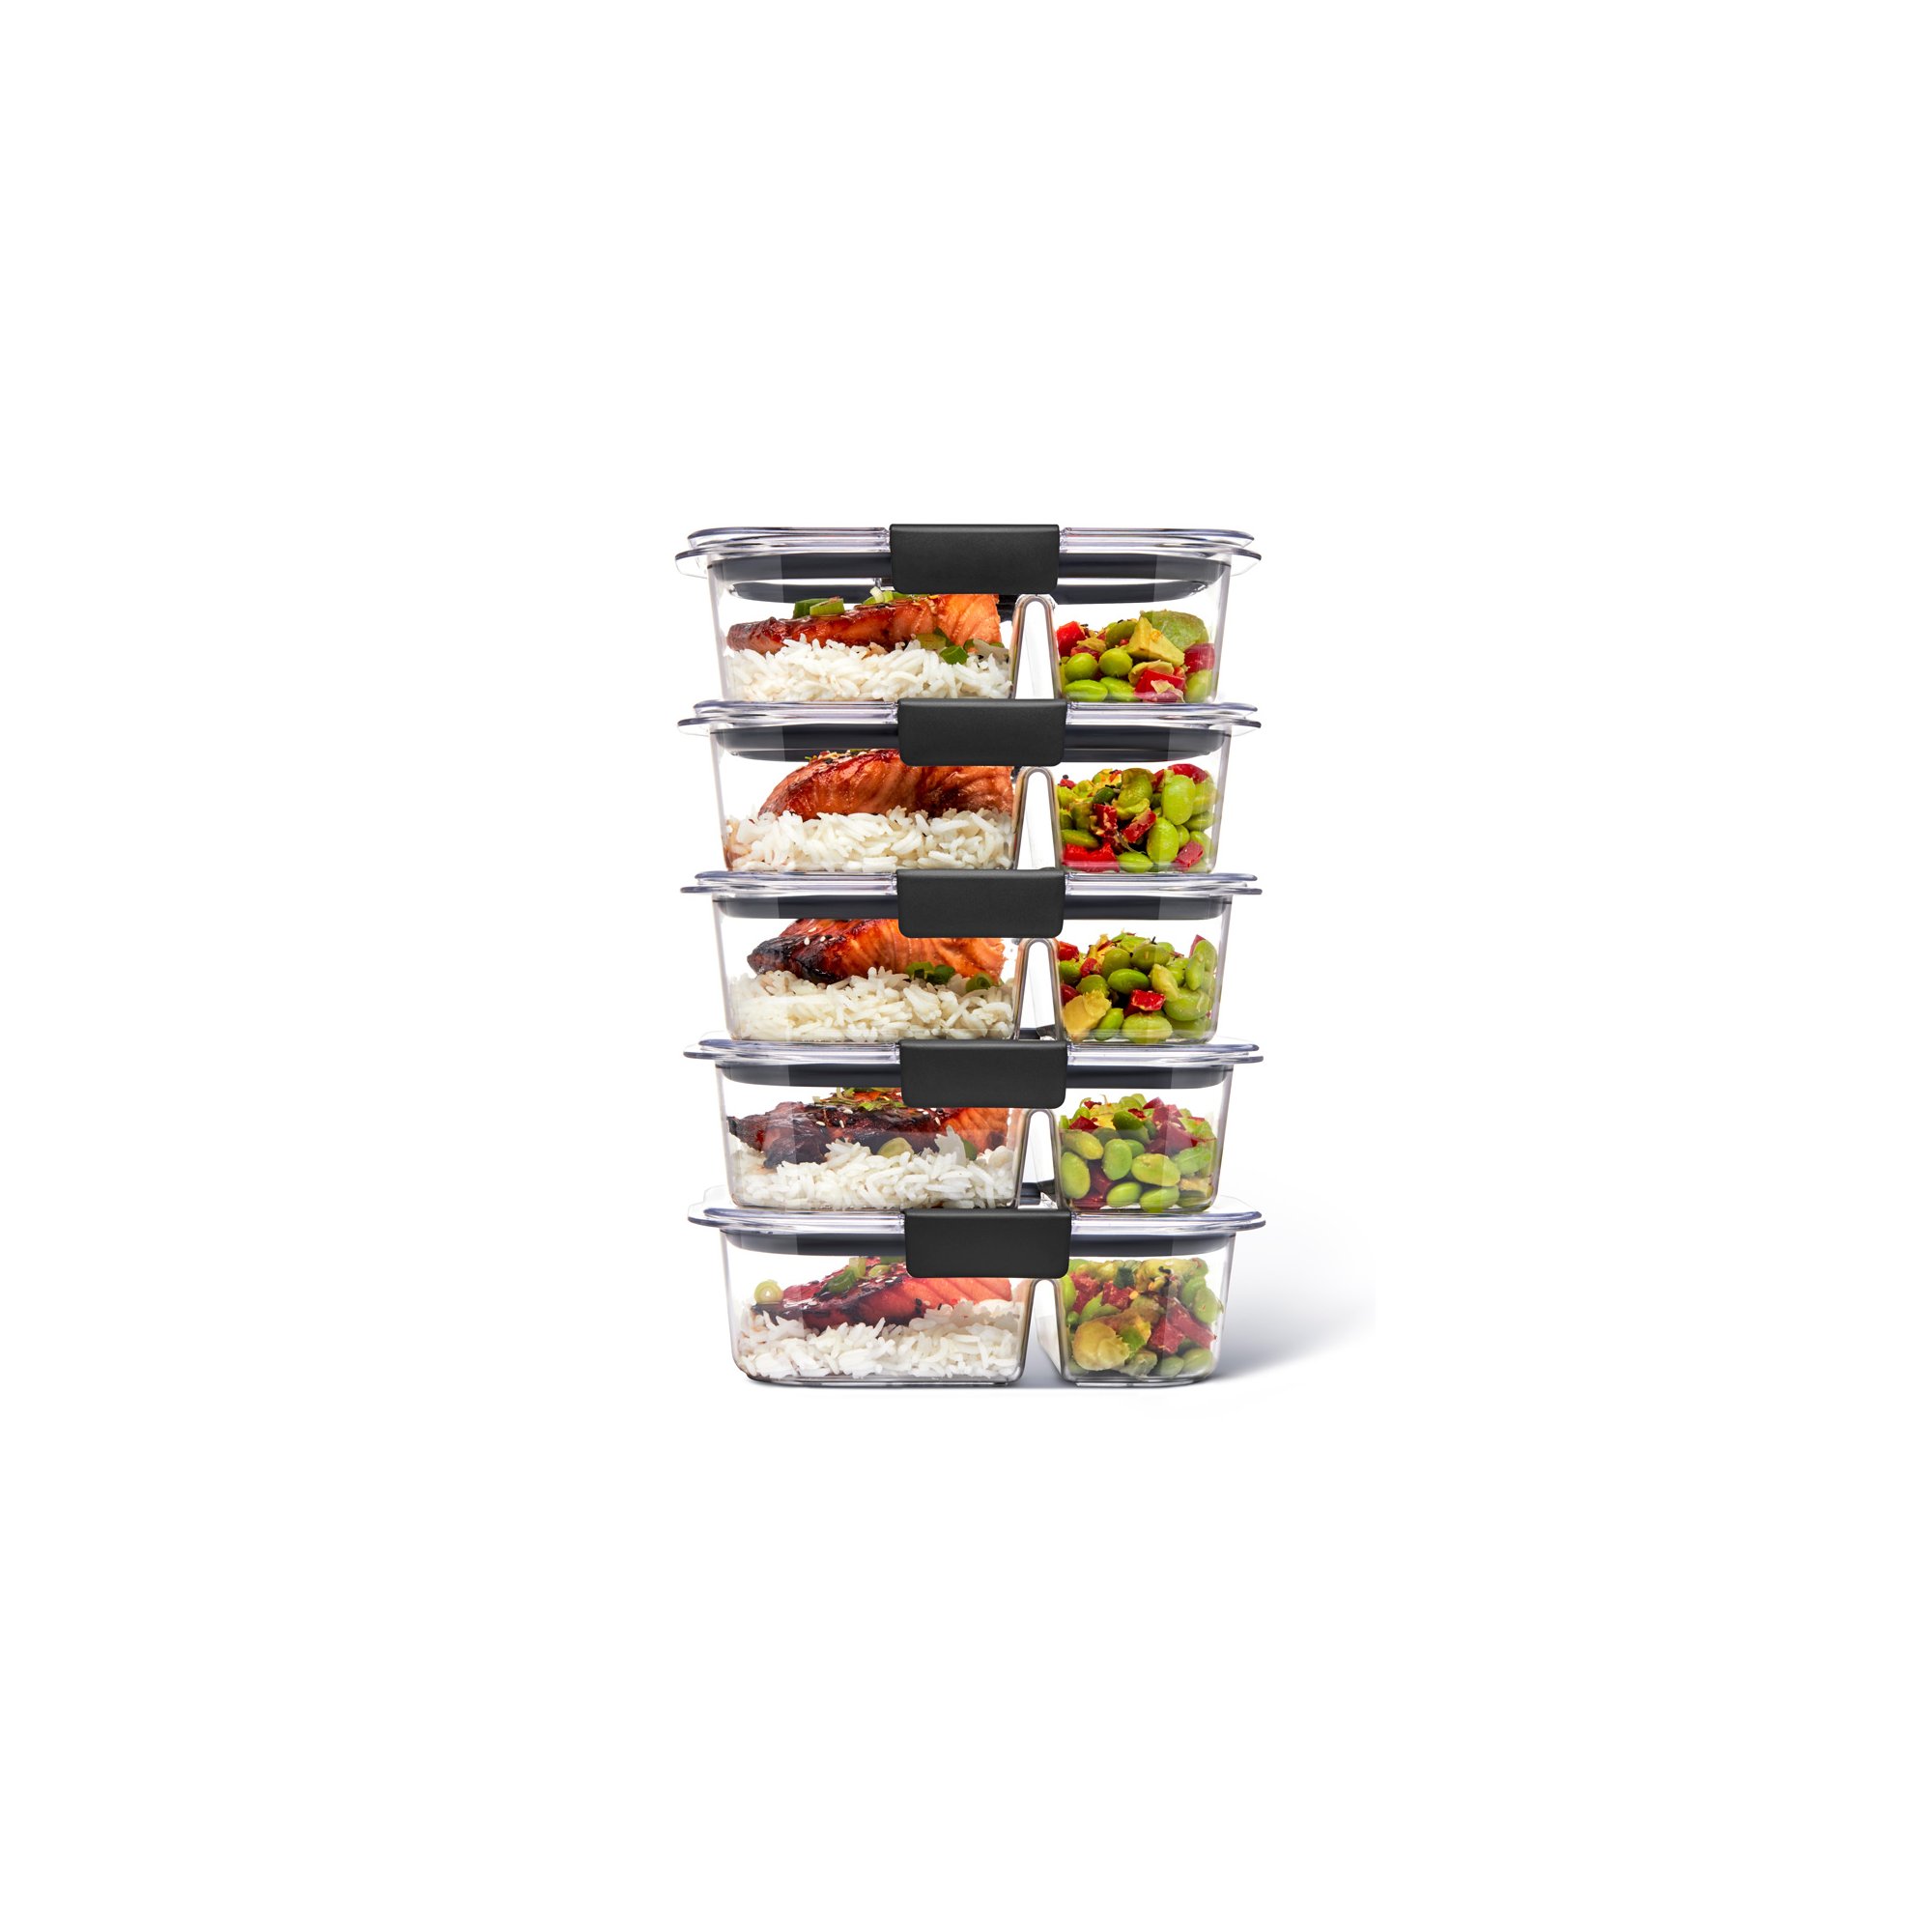 Rubbermaid Brilliance Food Storage Container, Mini, 0.5 Cup, Clear, 2 Pack  – Healthier Spaces Organizing